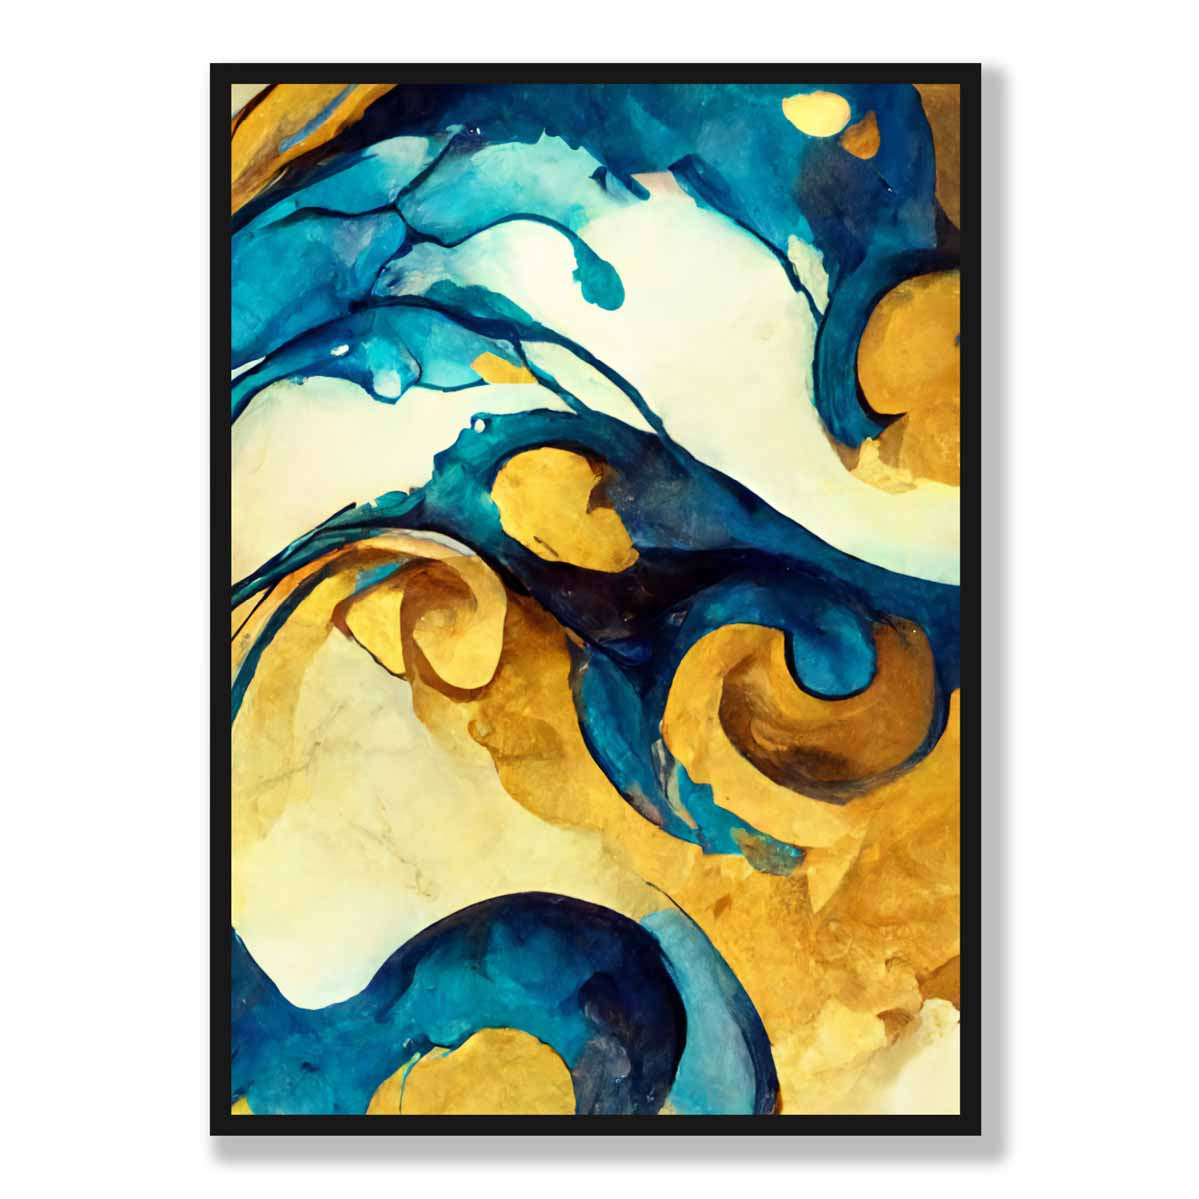 Abstract Art Print in Yellow and Blue No 2